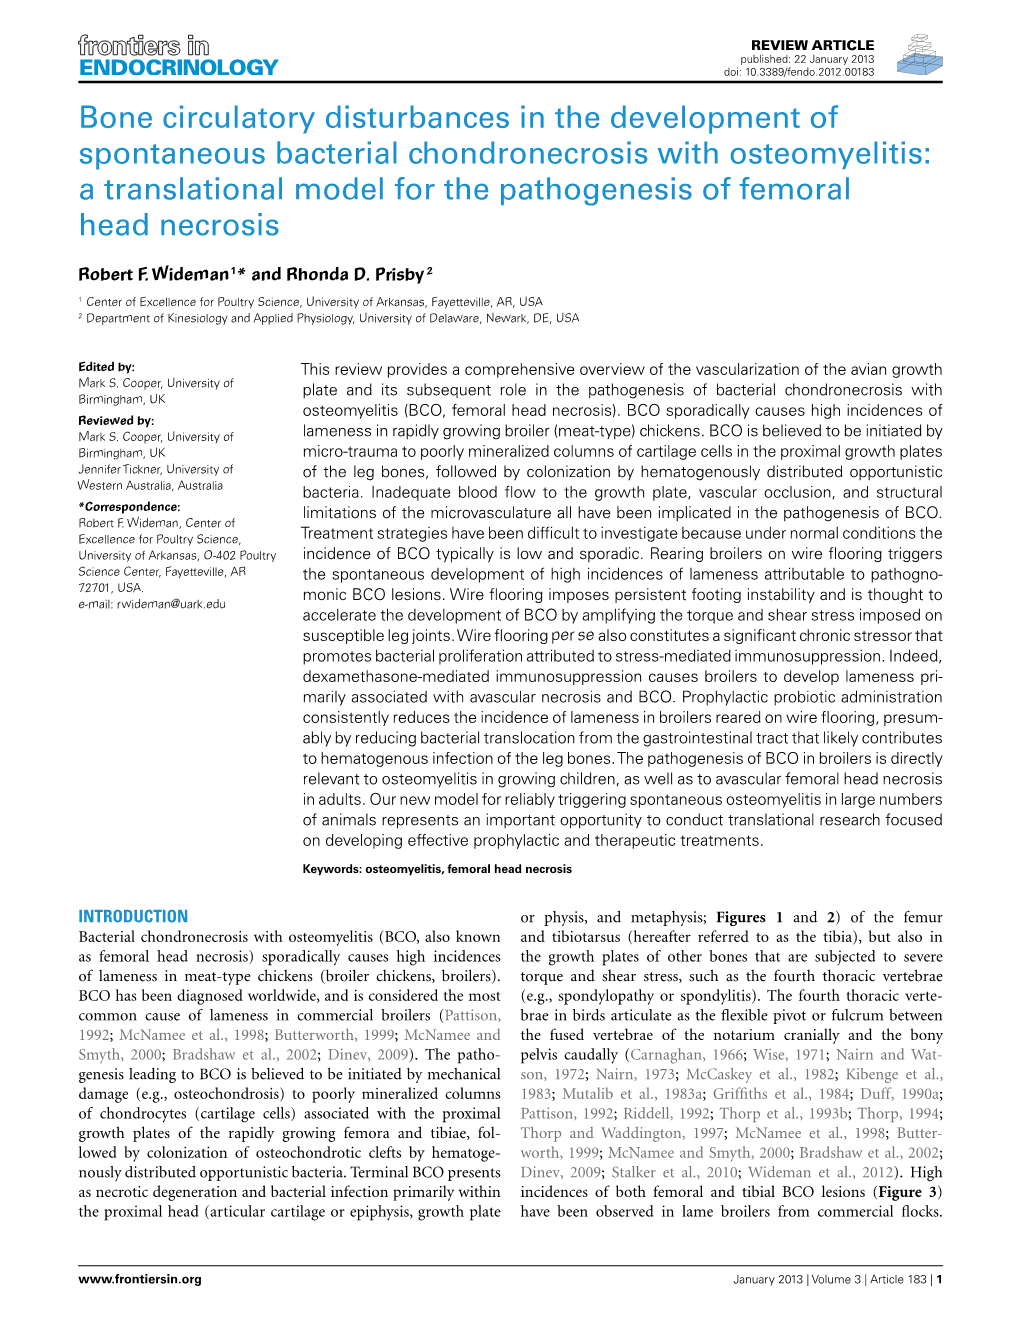 A Translational Model for the Pathogenesis of Femoral Head Necrosis